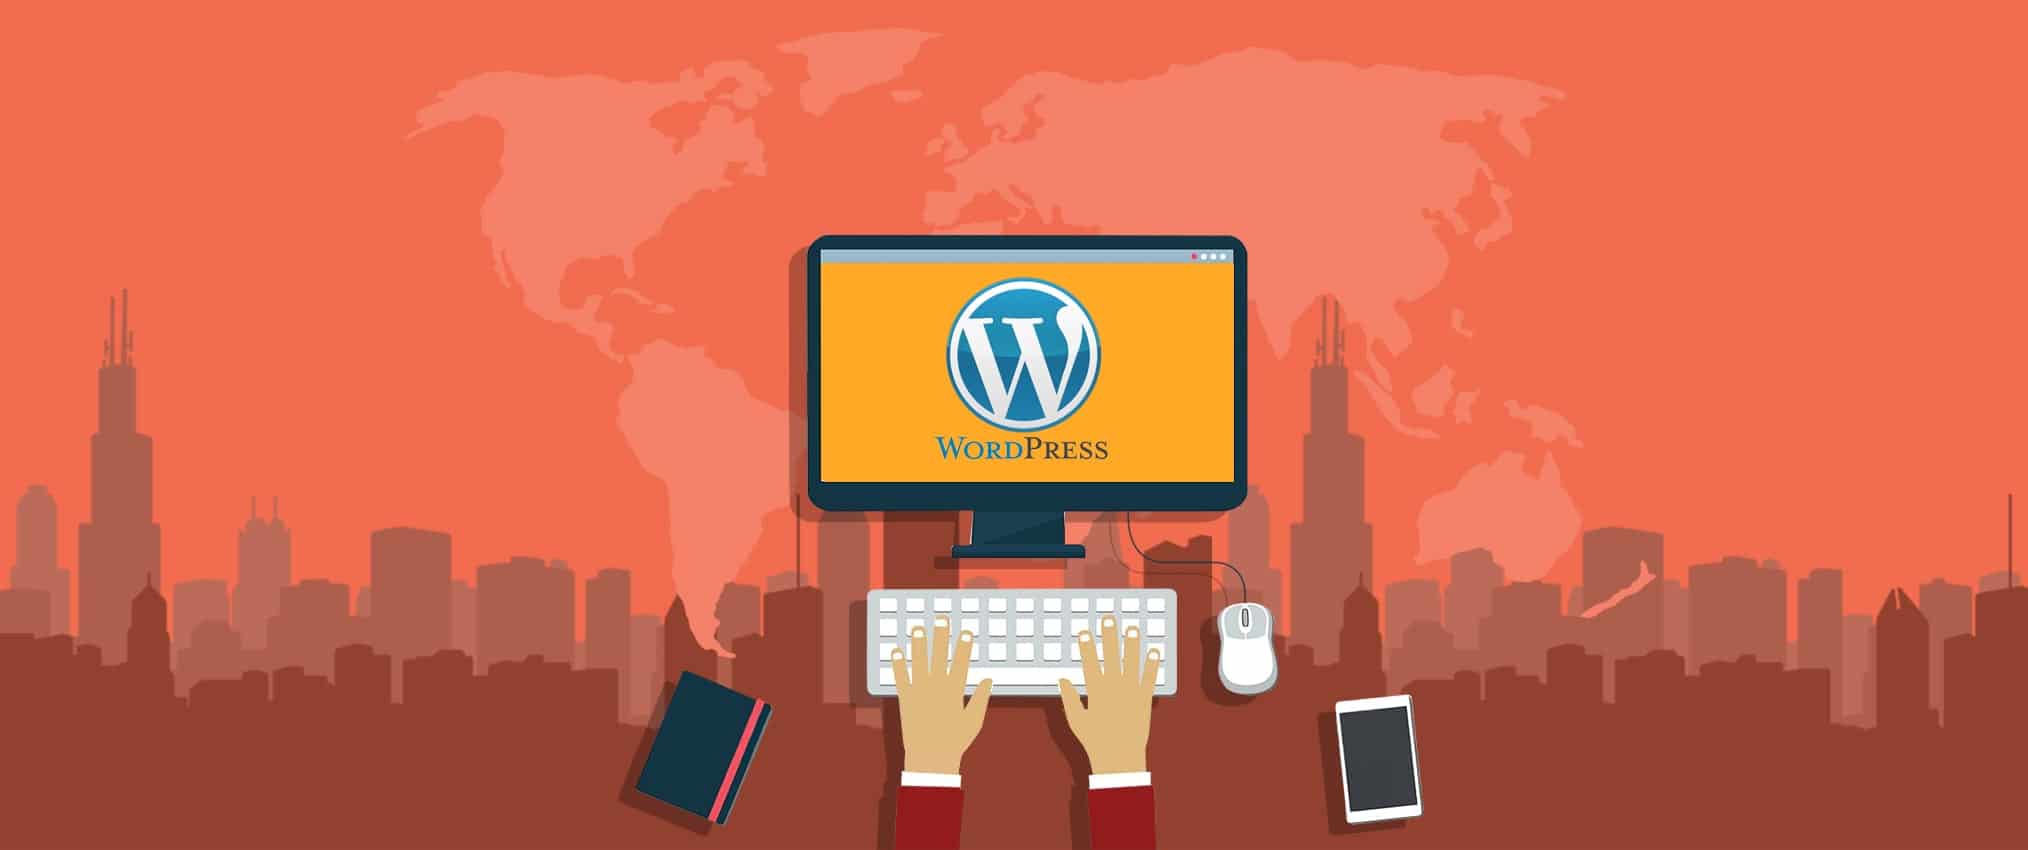 6 Reasons Why You Should Use WordPress For Your Business Website